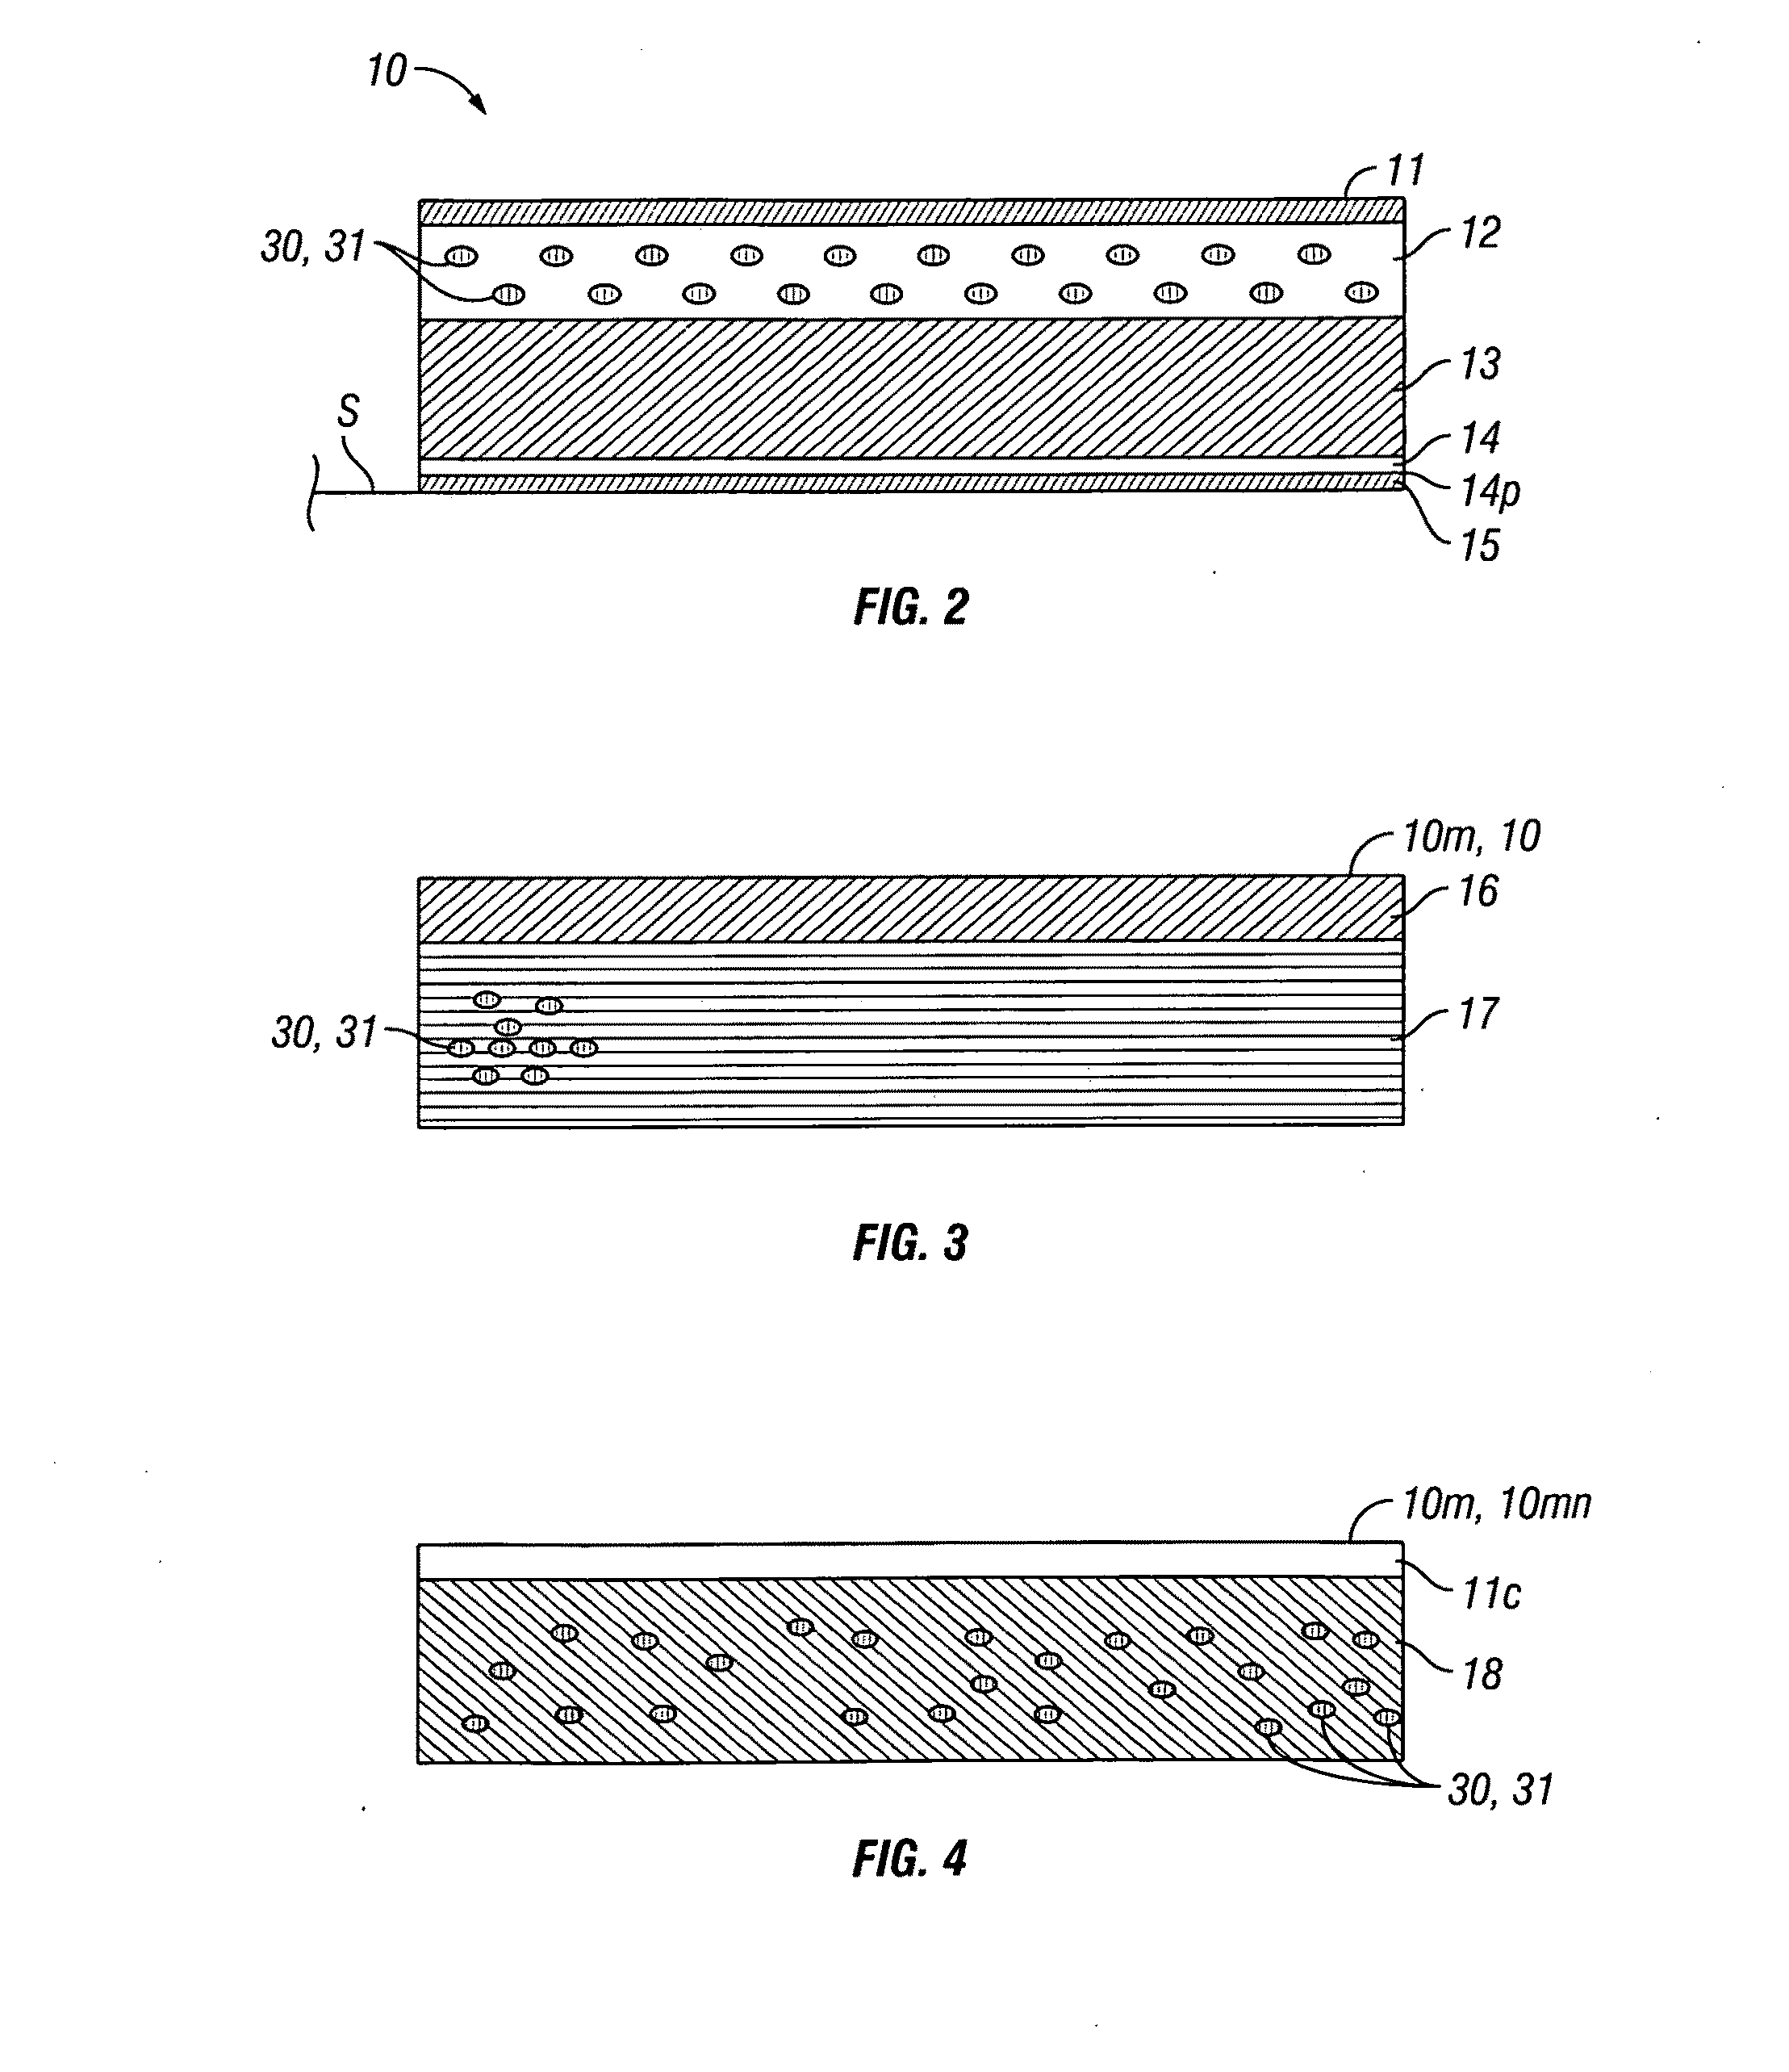 Patches and method for the transdermal delivery of a therapeutically effective amount of iron